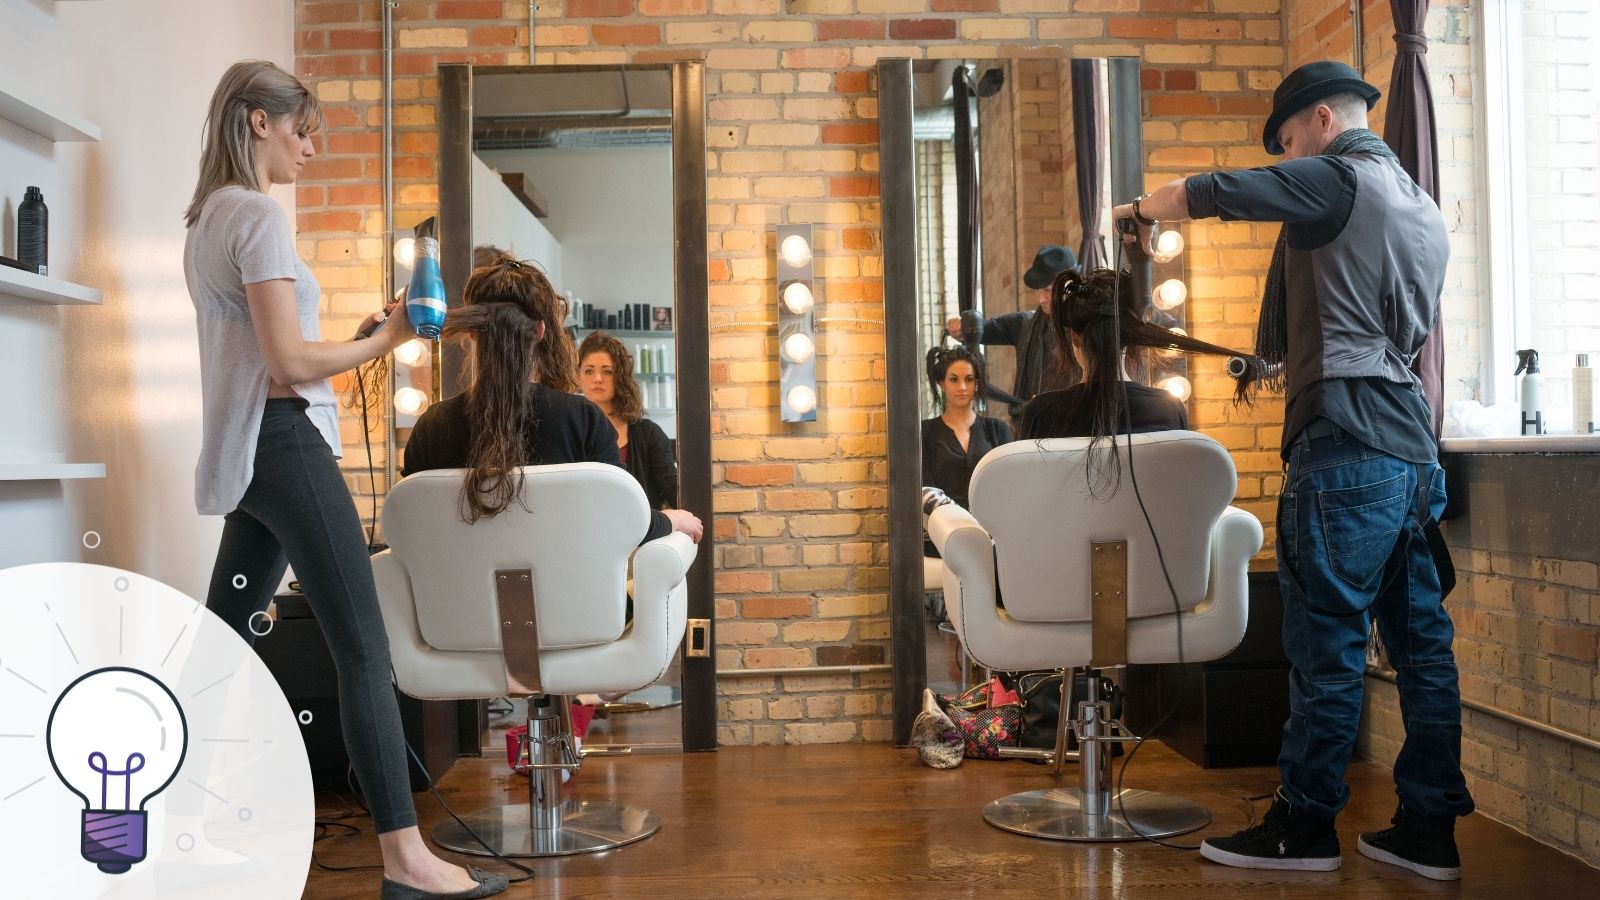 How to Be a Faster Hair Stylist: Top Ways to Speed Up Cuts